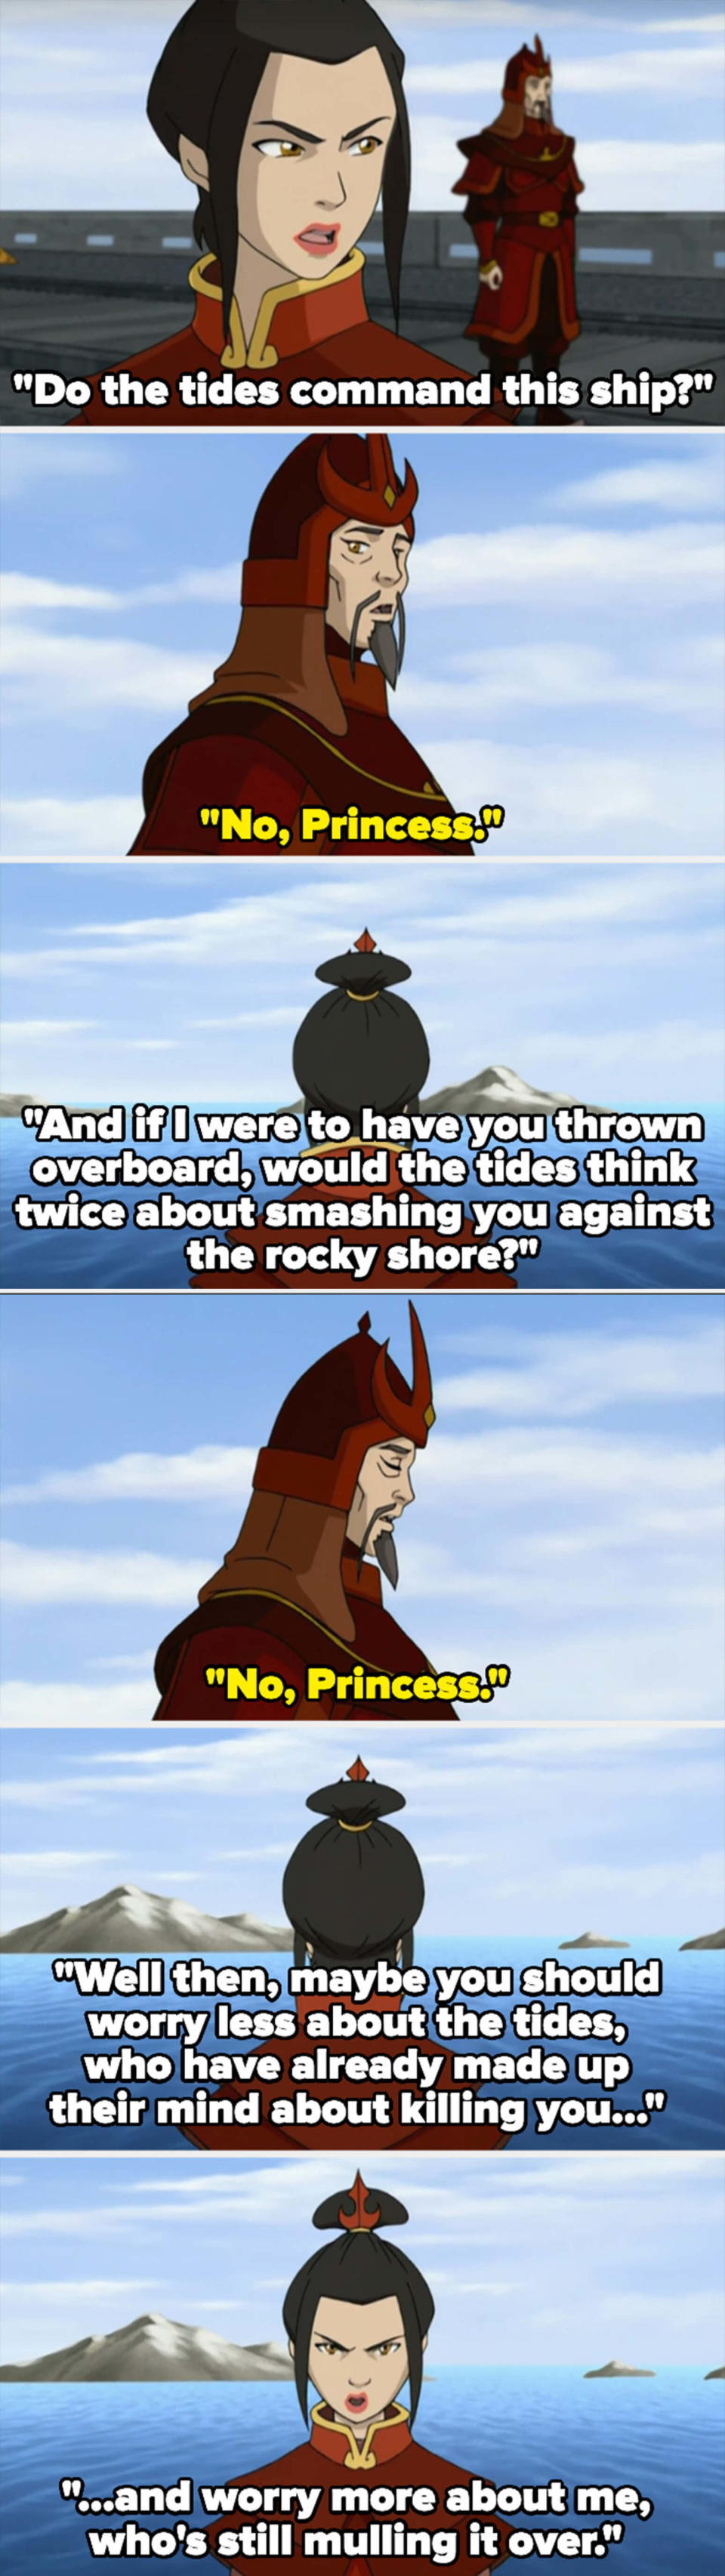 Azula asks if the tides command the ship — her subordinate says no, so she asks that if she threw him overboard, if the tides would think twice about killing him. He replies no, so she says he should worry more about her and less about the tides